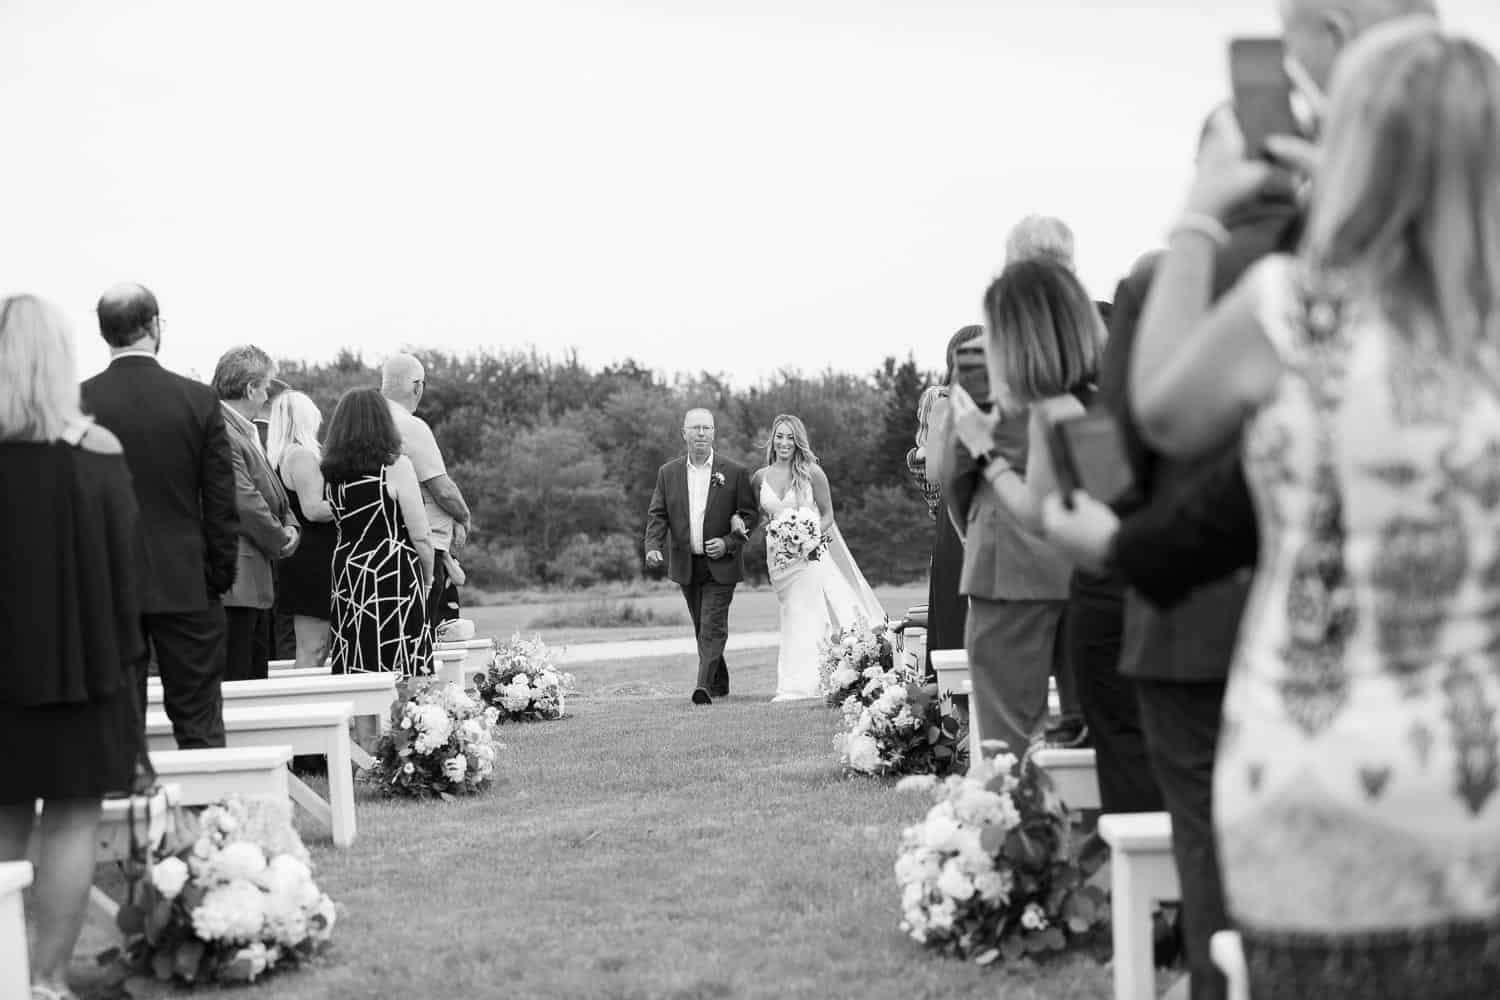 Black and white photo of guests watching a bride and her Dad walking down the aisle at an outdoor wedding ceremony.